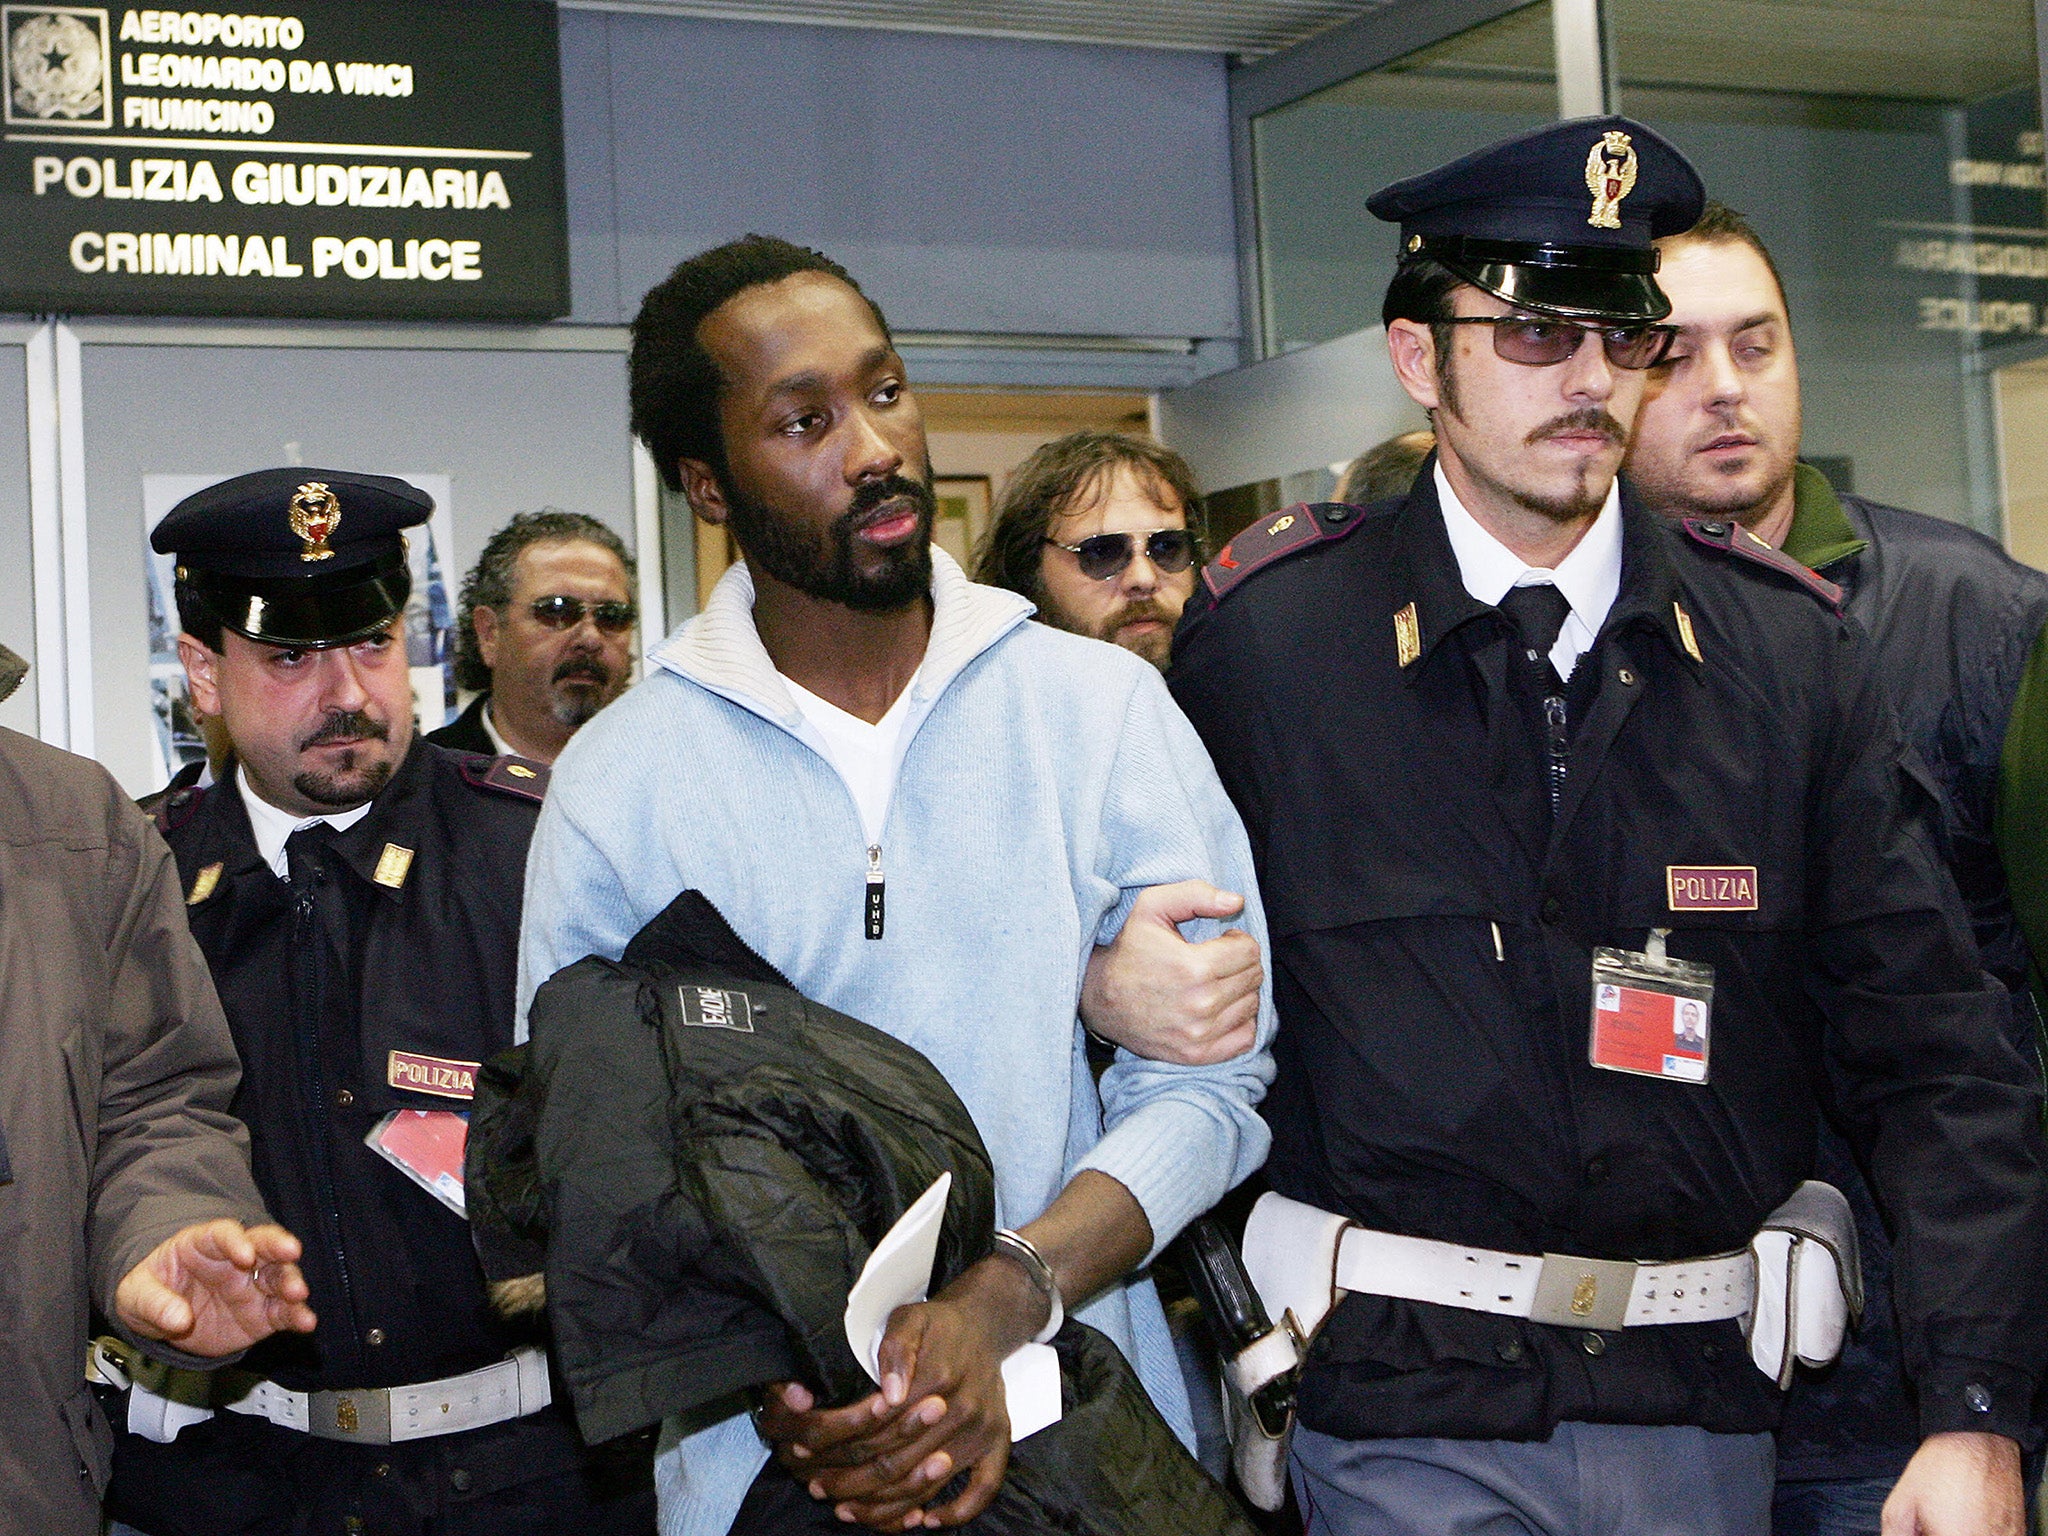 Rudy Guede was convicted of Meredith Kercher's murder in 2008